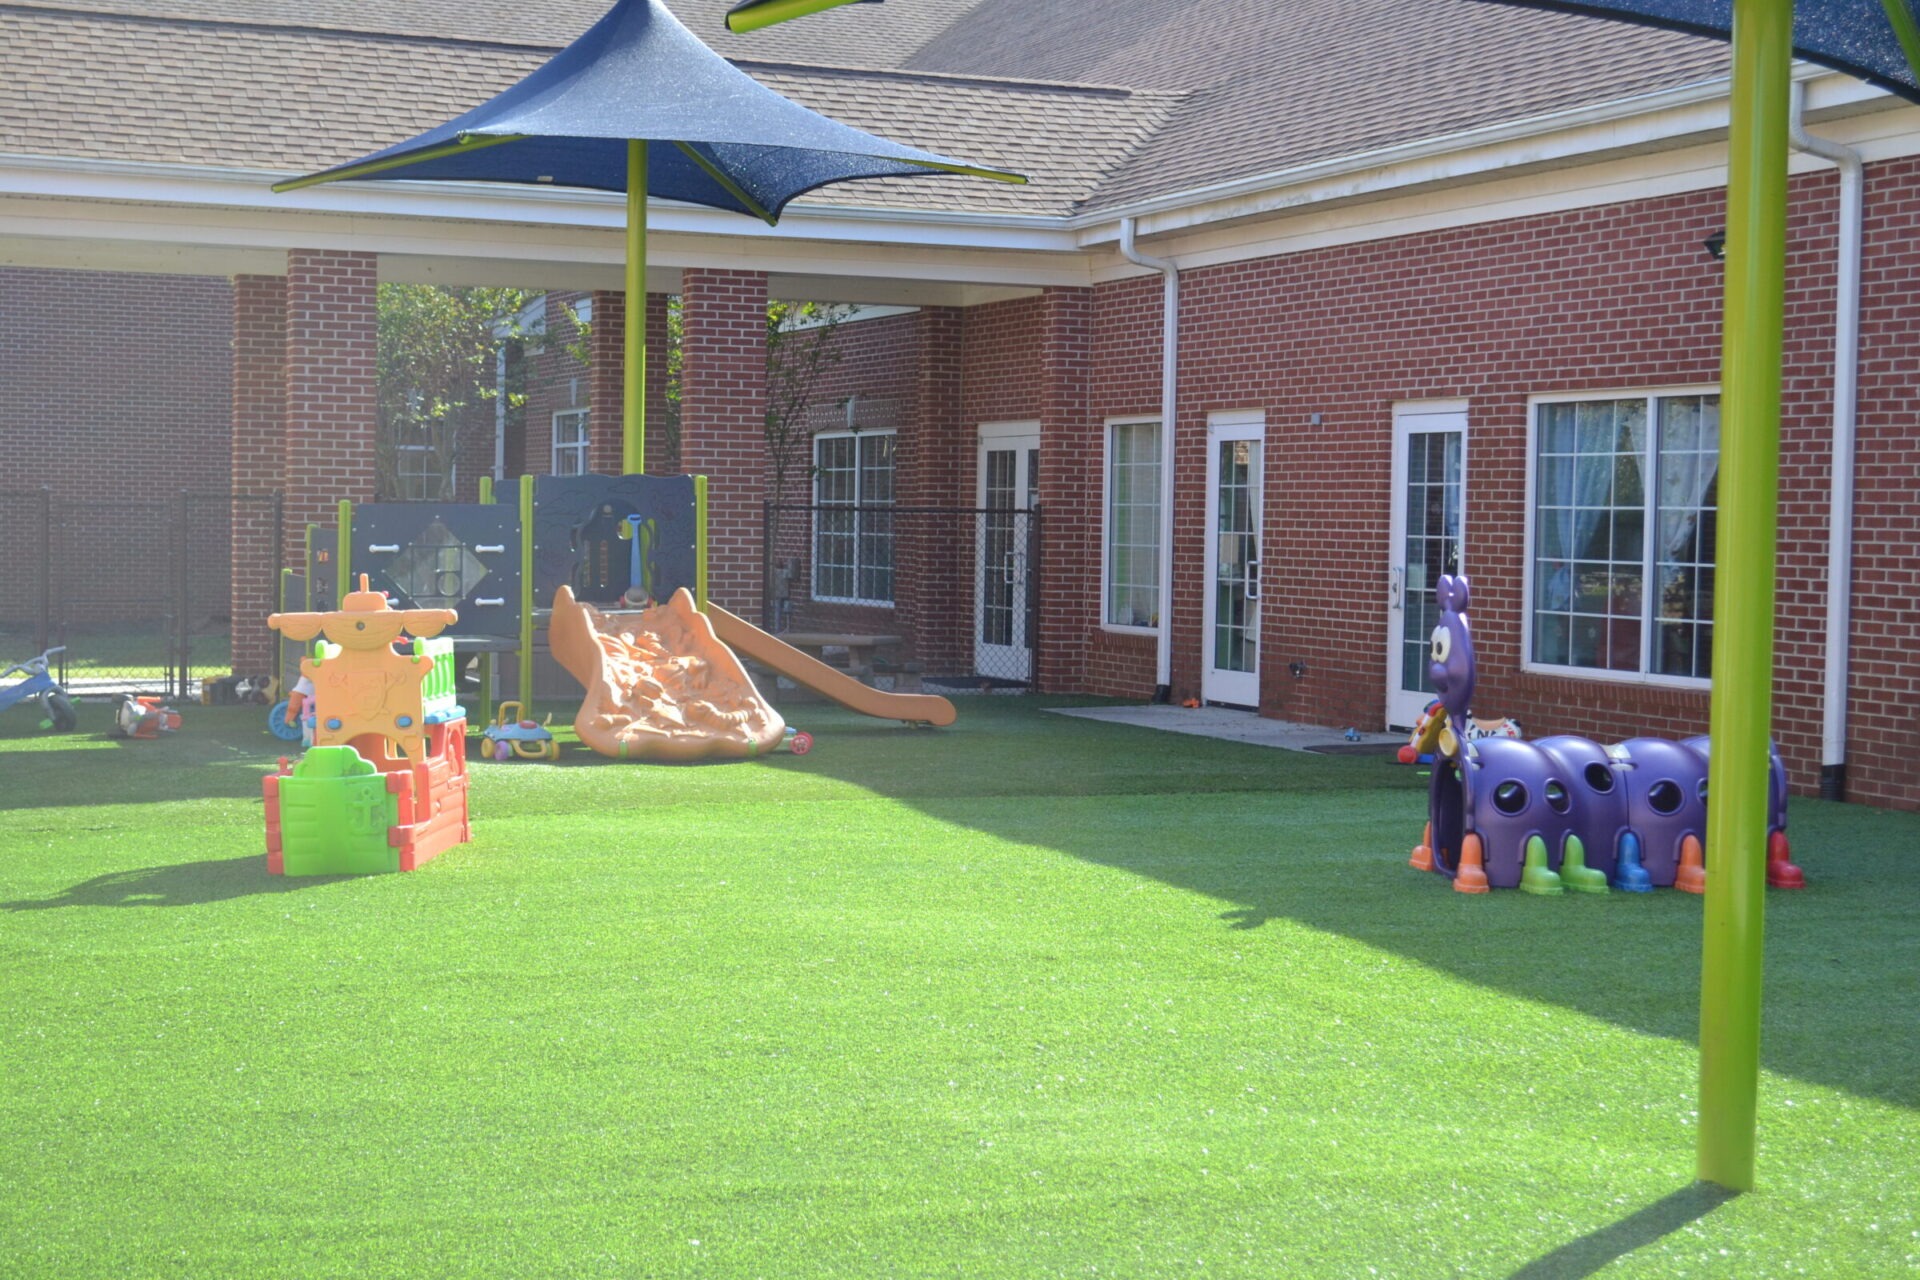 This is a brightly lit playground with colorful equipment, artificial grass, and a red brick building in the background, underneath a clear blue sky.